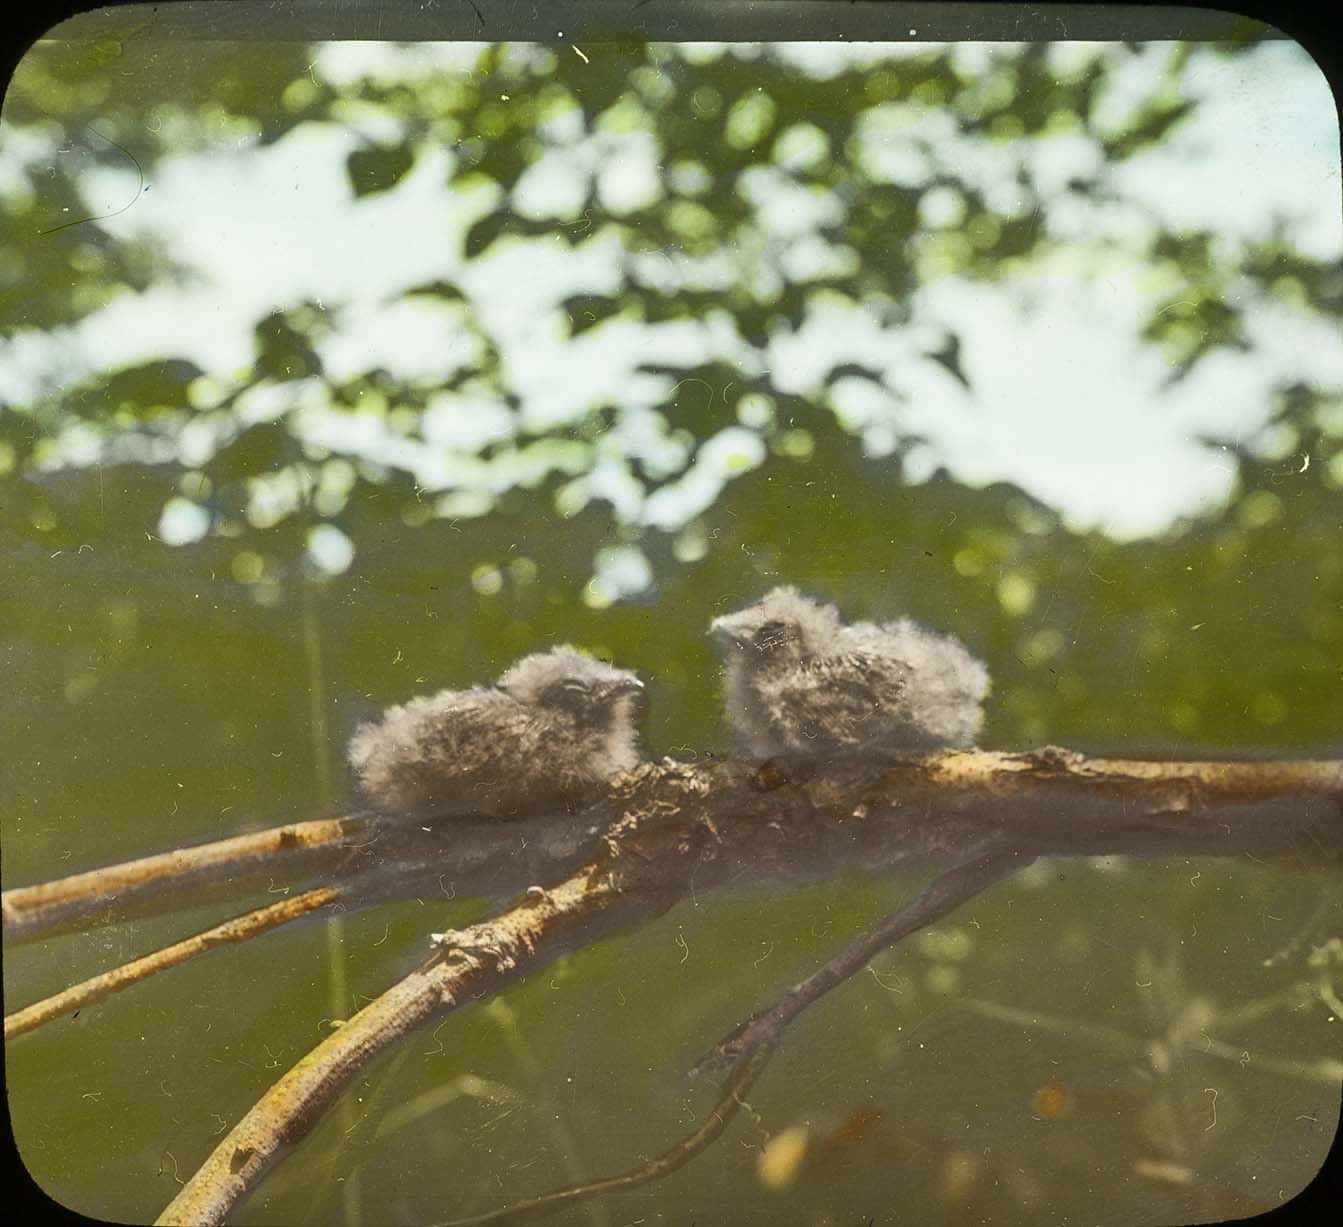 Lantern slide and photograph of two young Whip-poor-wills perching on a branch